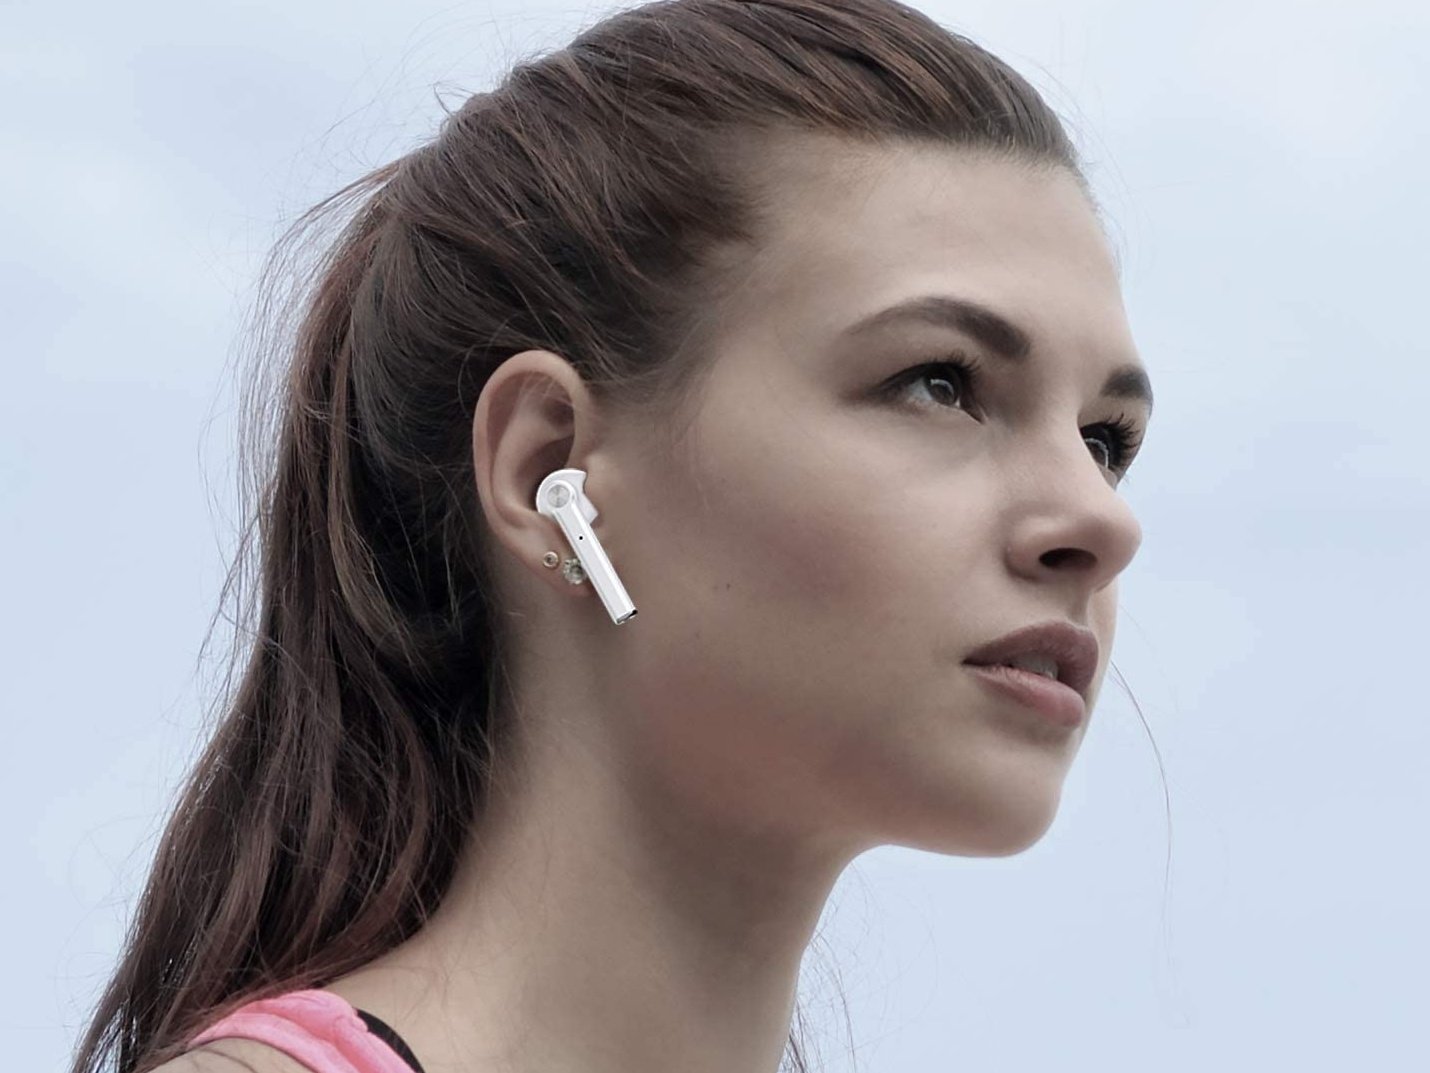 Take calls and get the most out of your earbuds without breaking the bank